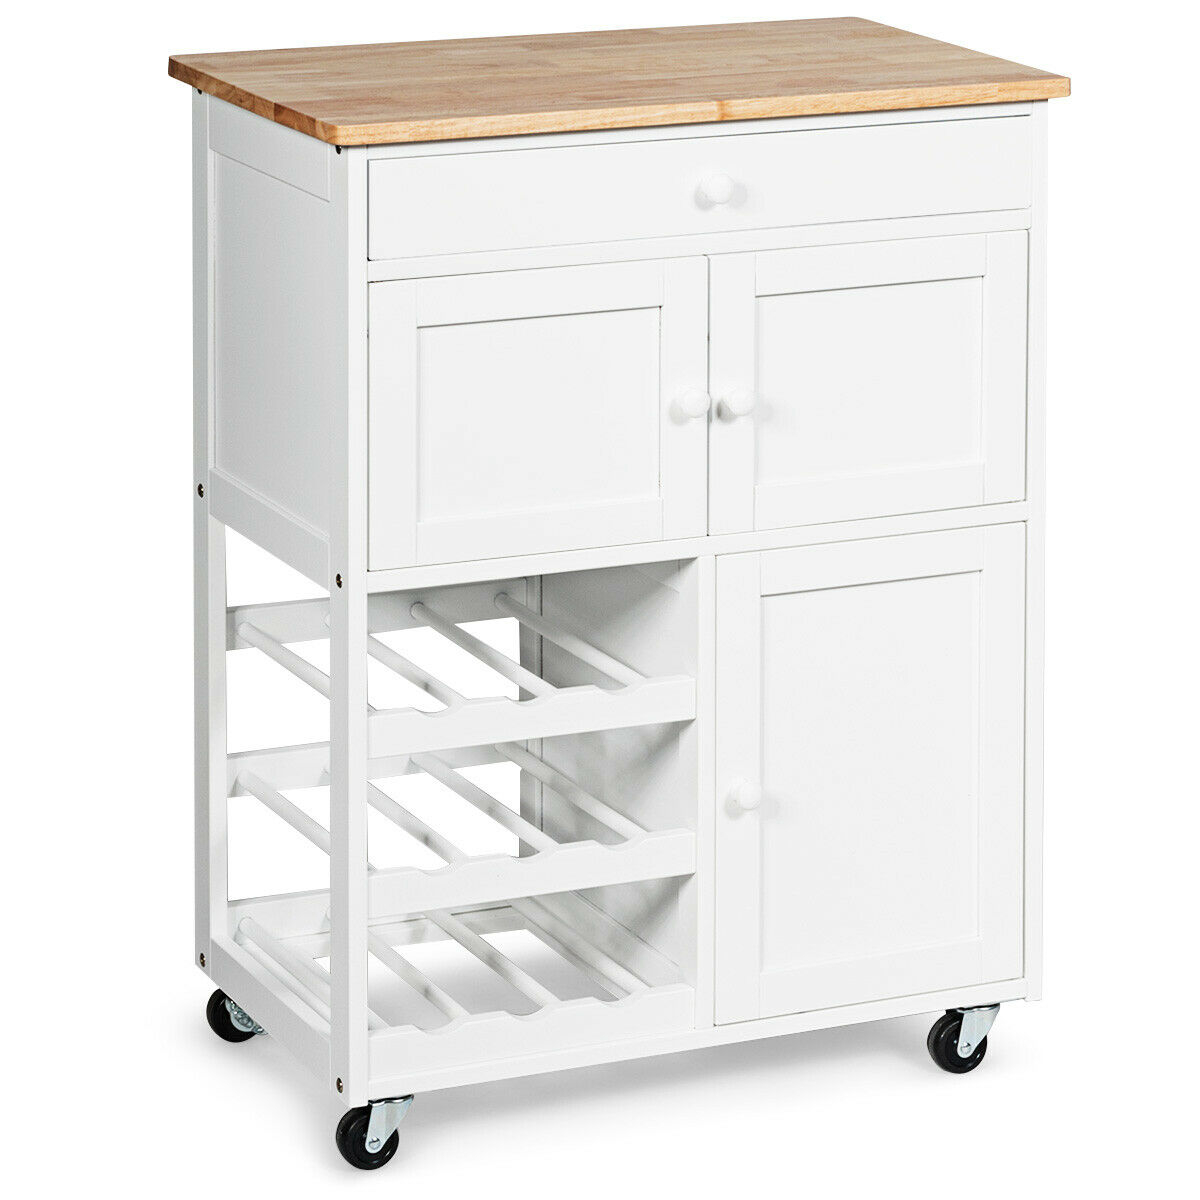 White MINGWANG Moveable Kitchen Cart with Two Drawers /& Two Wine Racks /& Three Baskets Bar Serving Carts 26.38 x 14.77 x 29.92